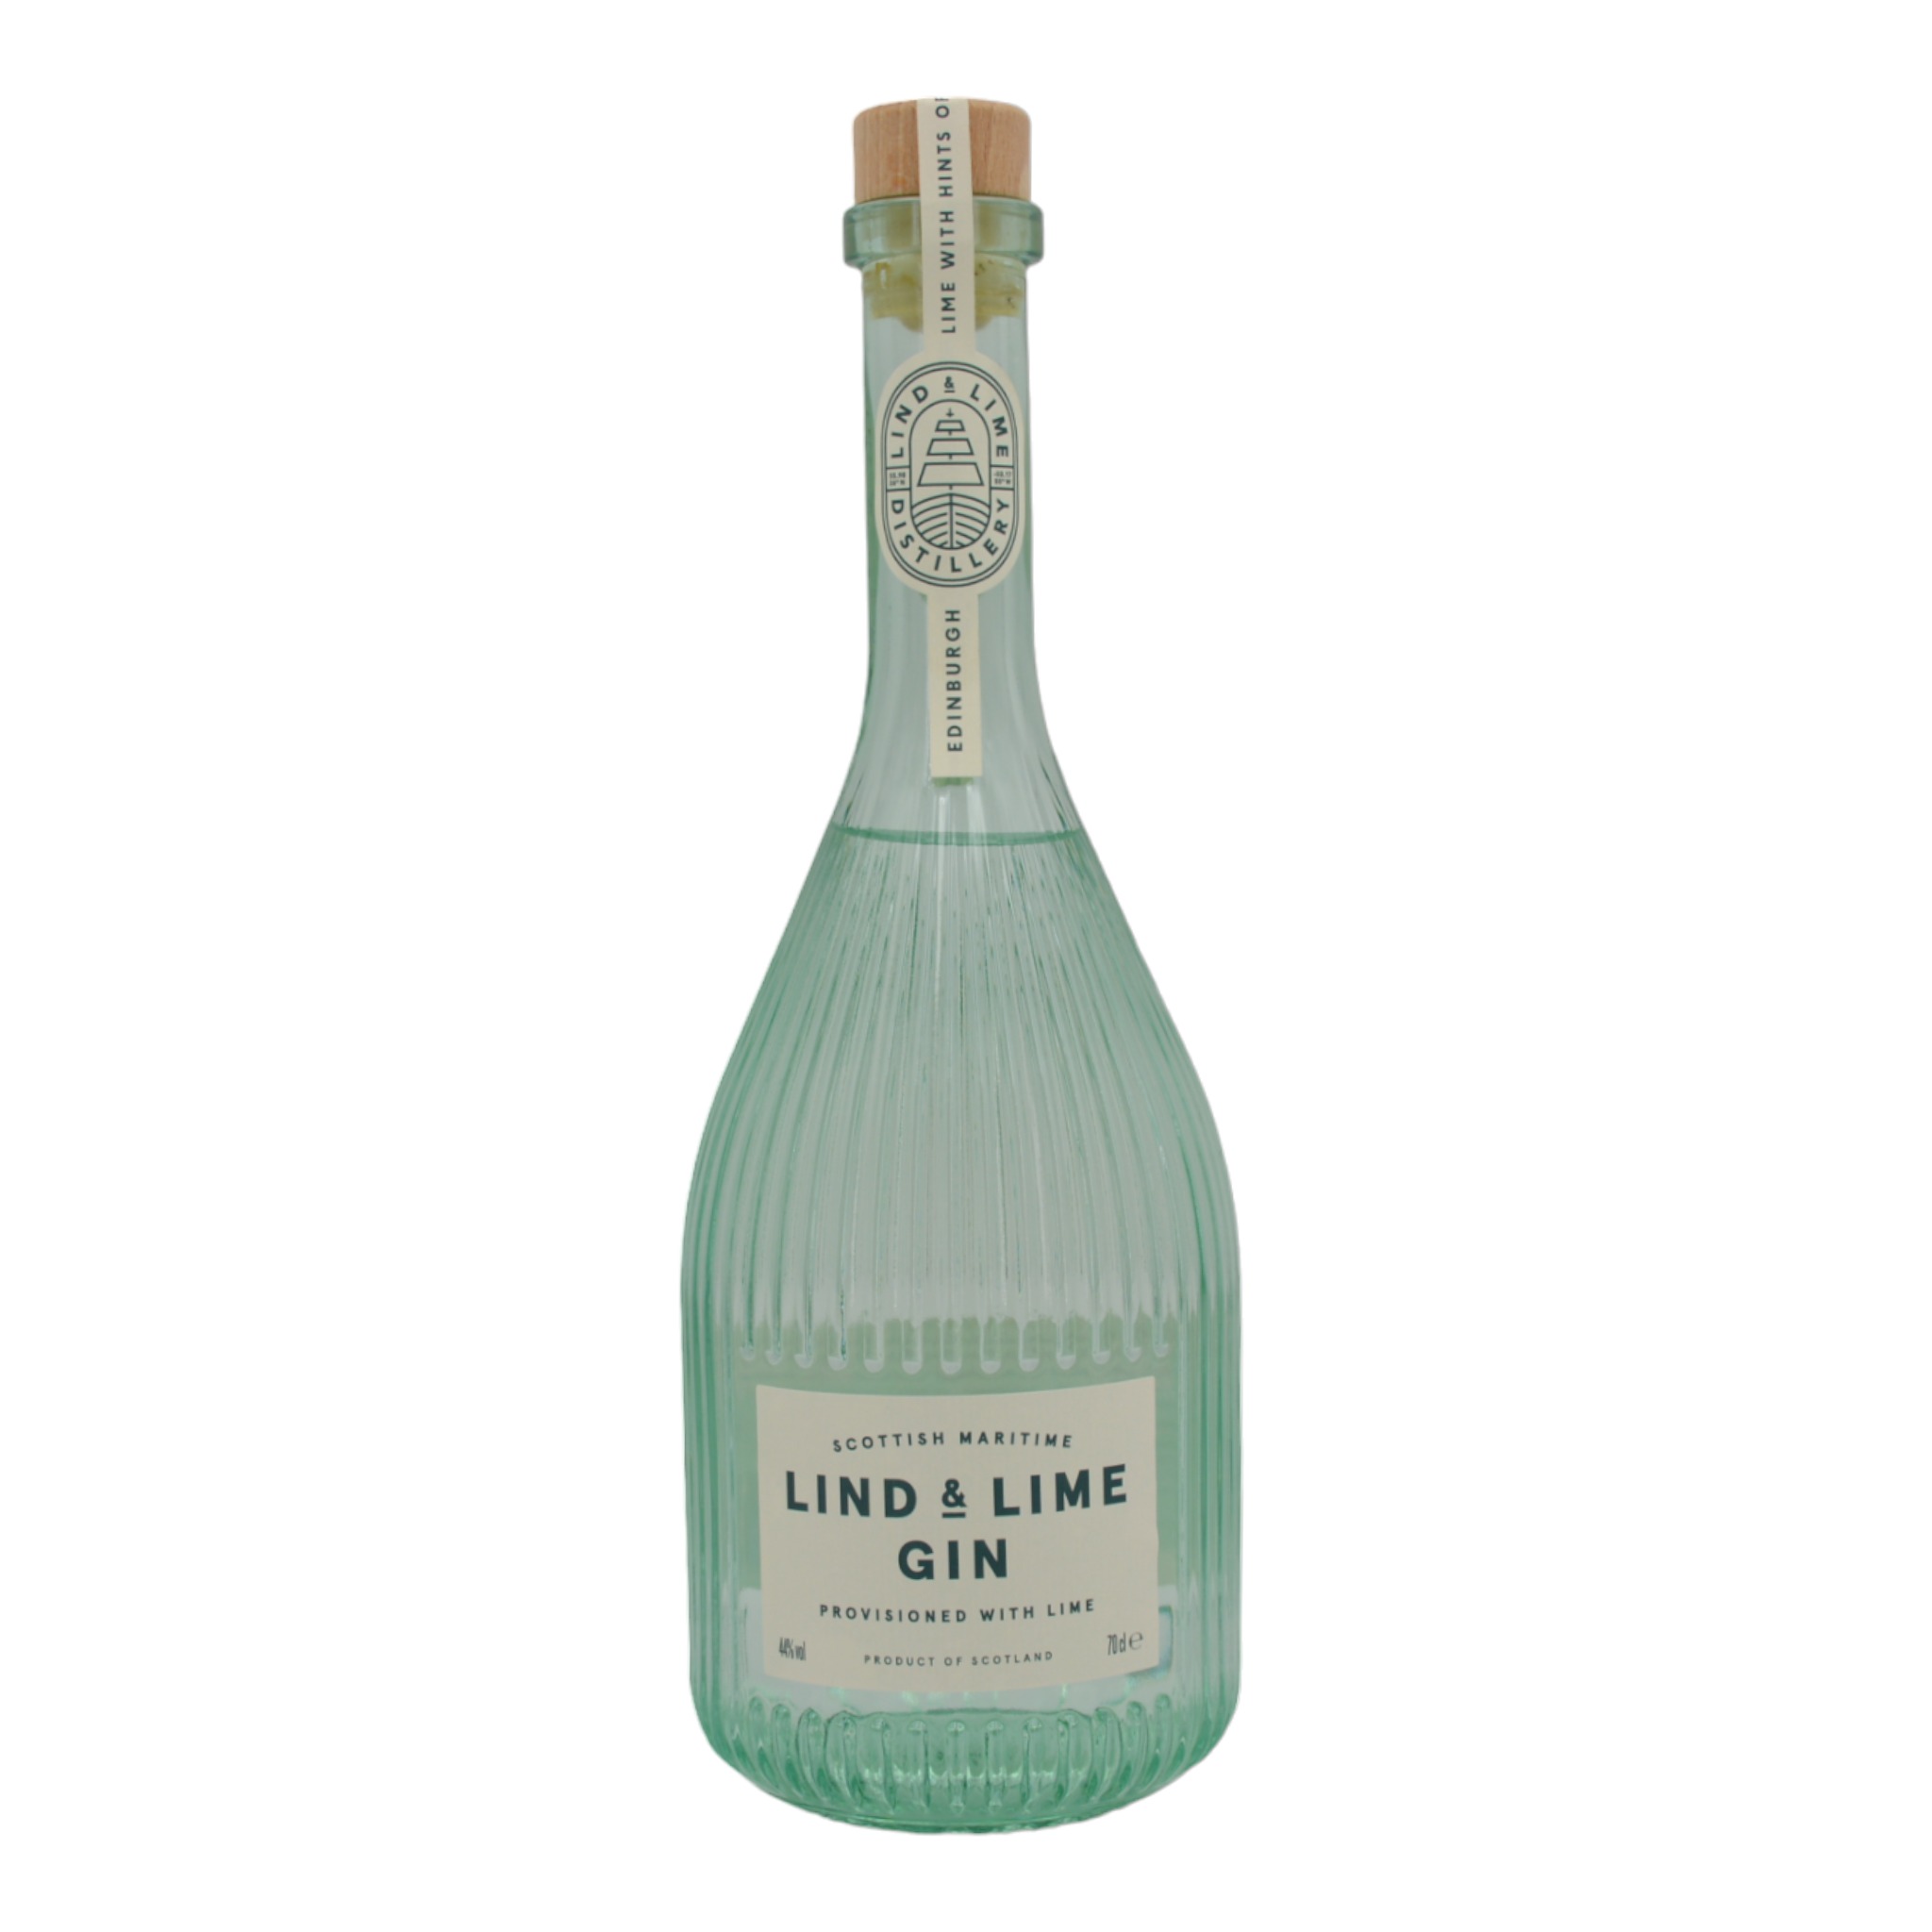 5060577440017Lind and Lime Scottish Maritime Gin Provisioned with Lime f - Weinhaus-Buecker